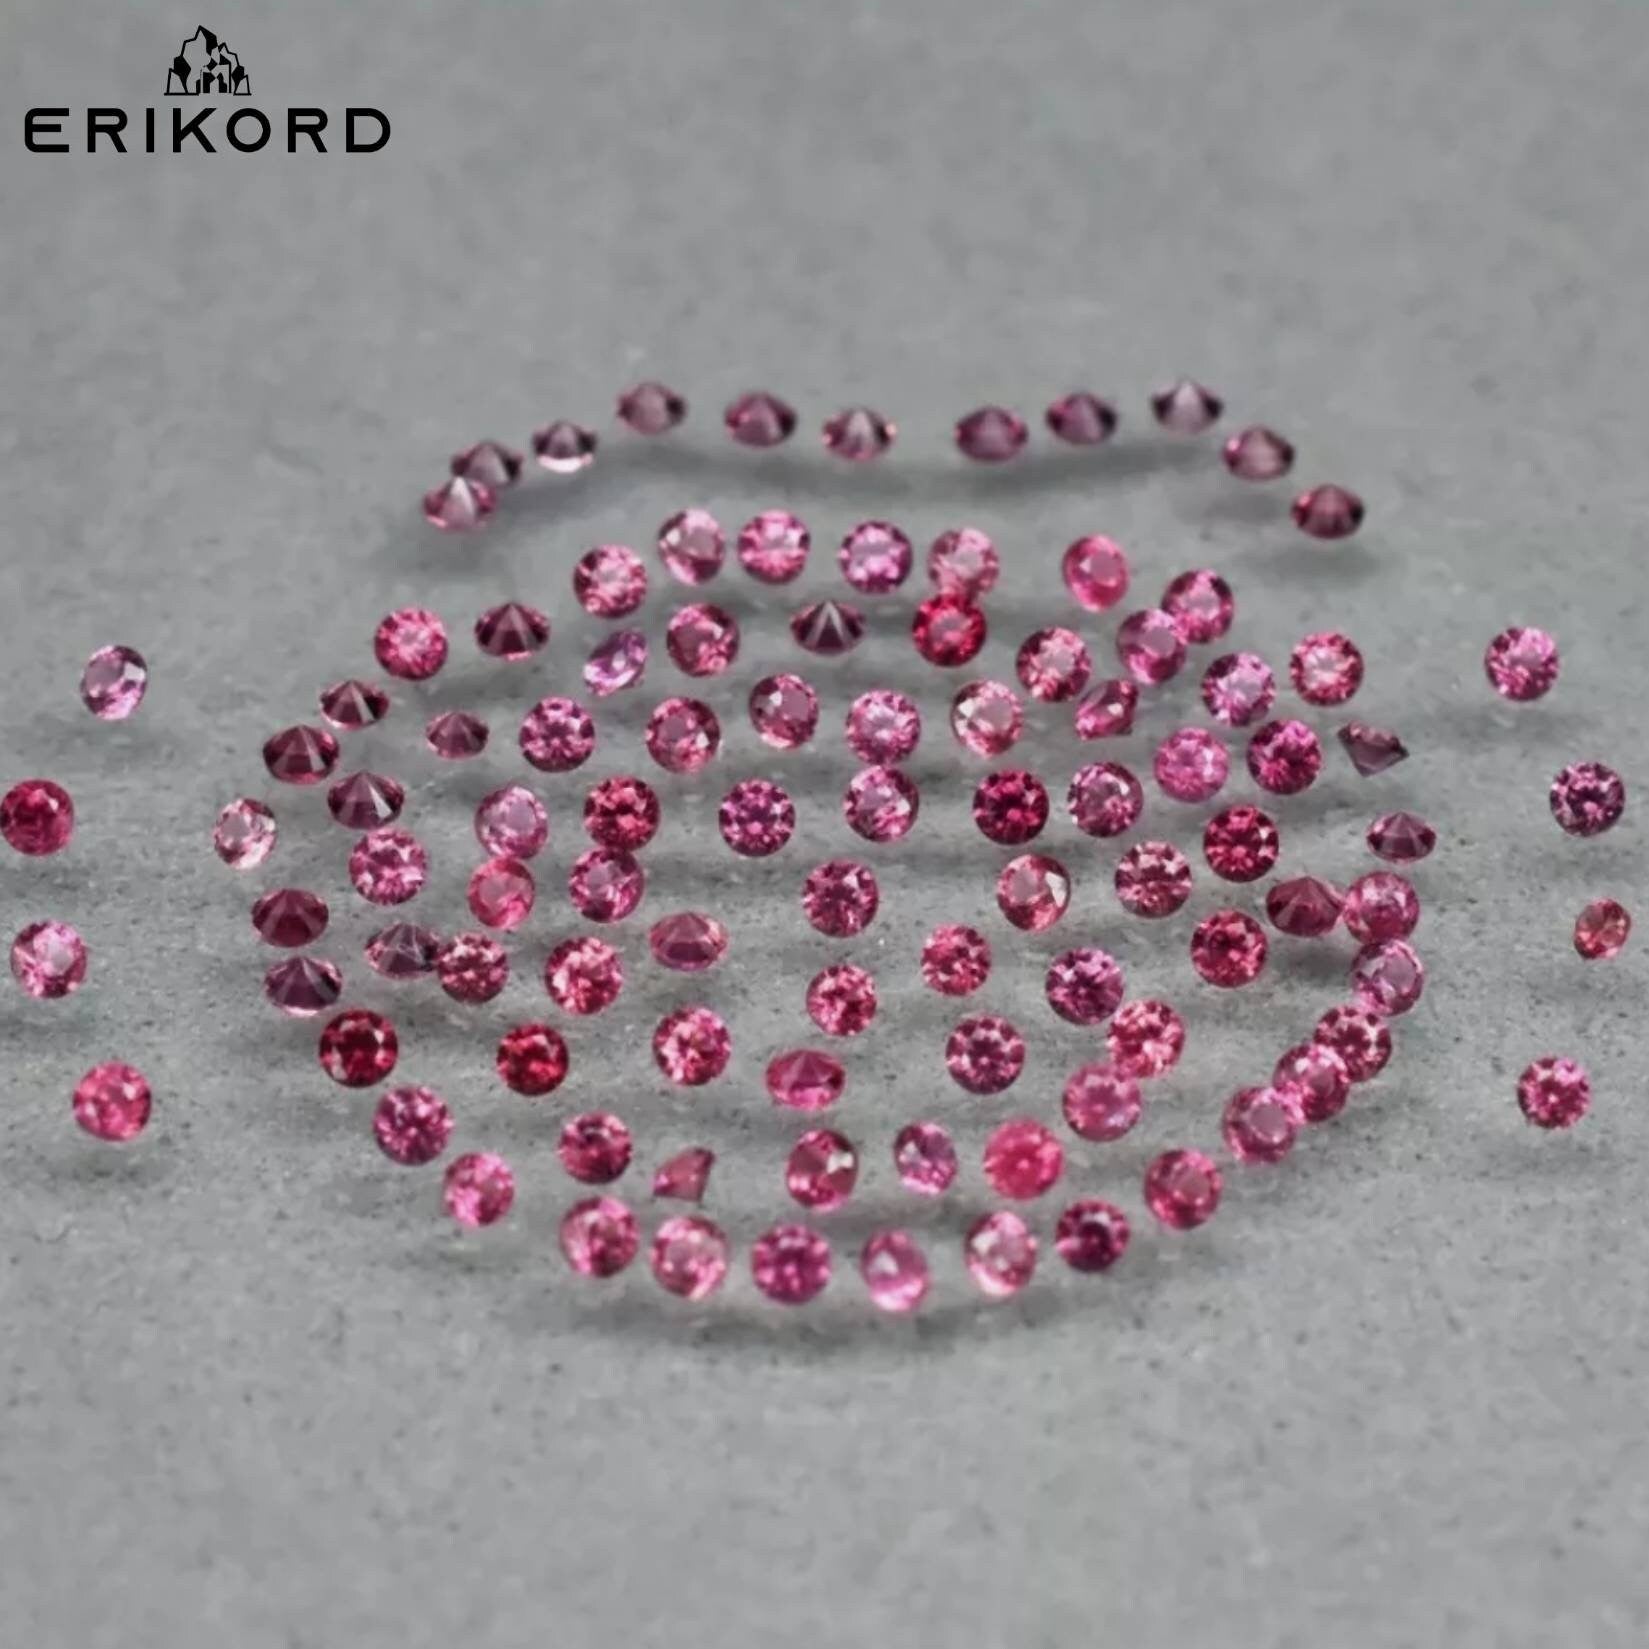 Extra TINY! 1mm 103pc Lot of Pink Sapphire Beryllium Heat Treated Pinkish Purple Sapphire Lot Natural Sapphires Round Faceted Sapphire Lot